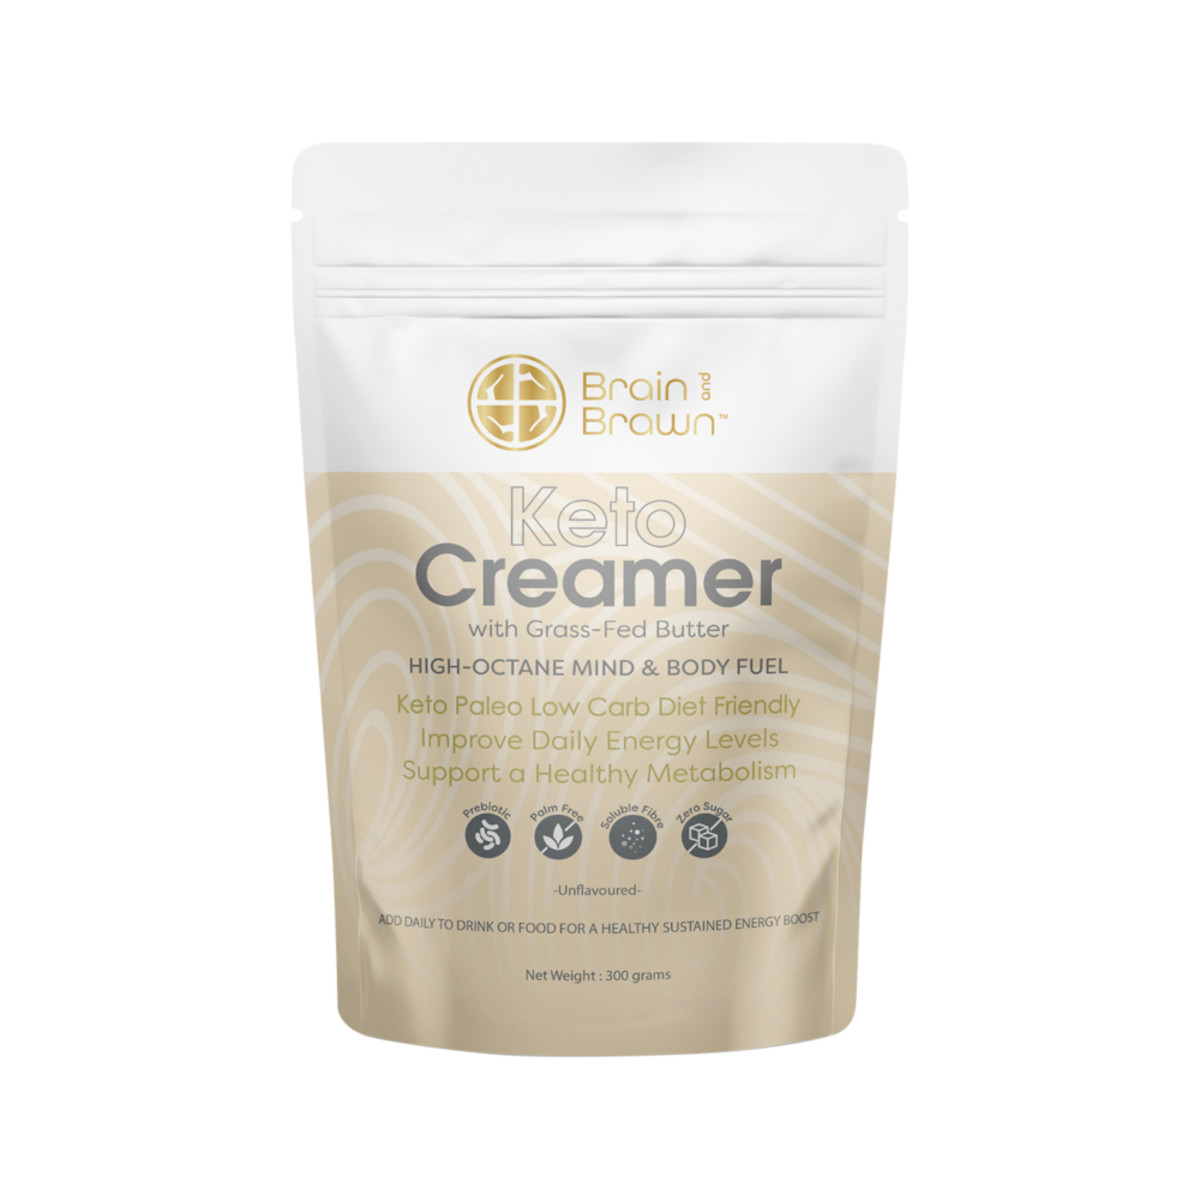 BRAIN AND BRAWN - Keto Creamer (with Grass-Fed Butter) Unflavoured